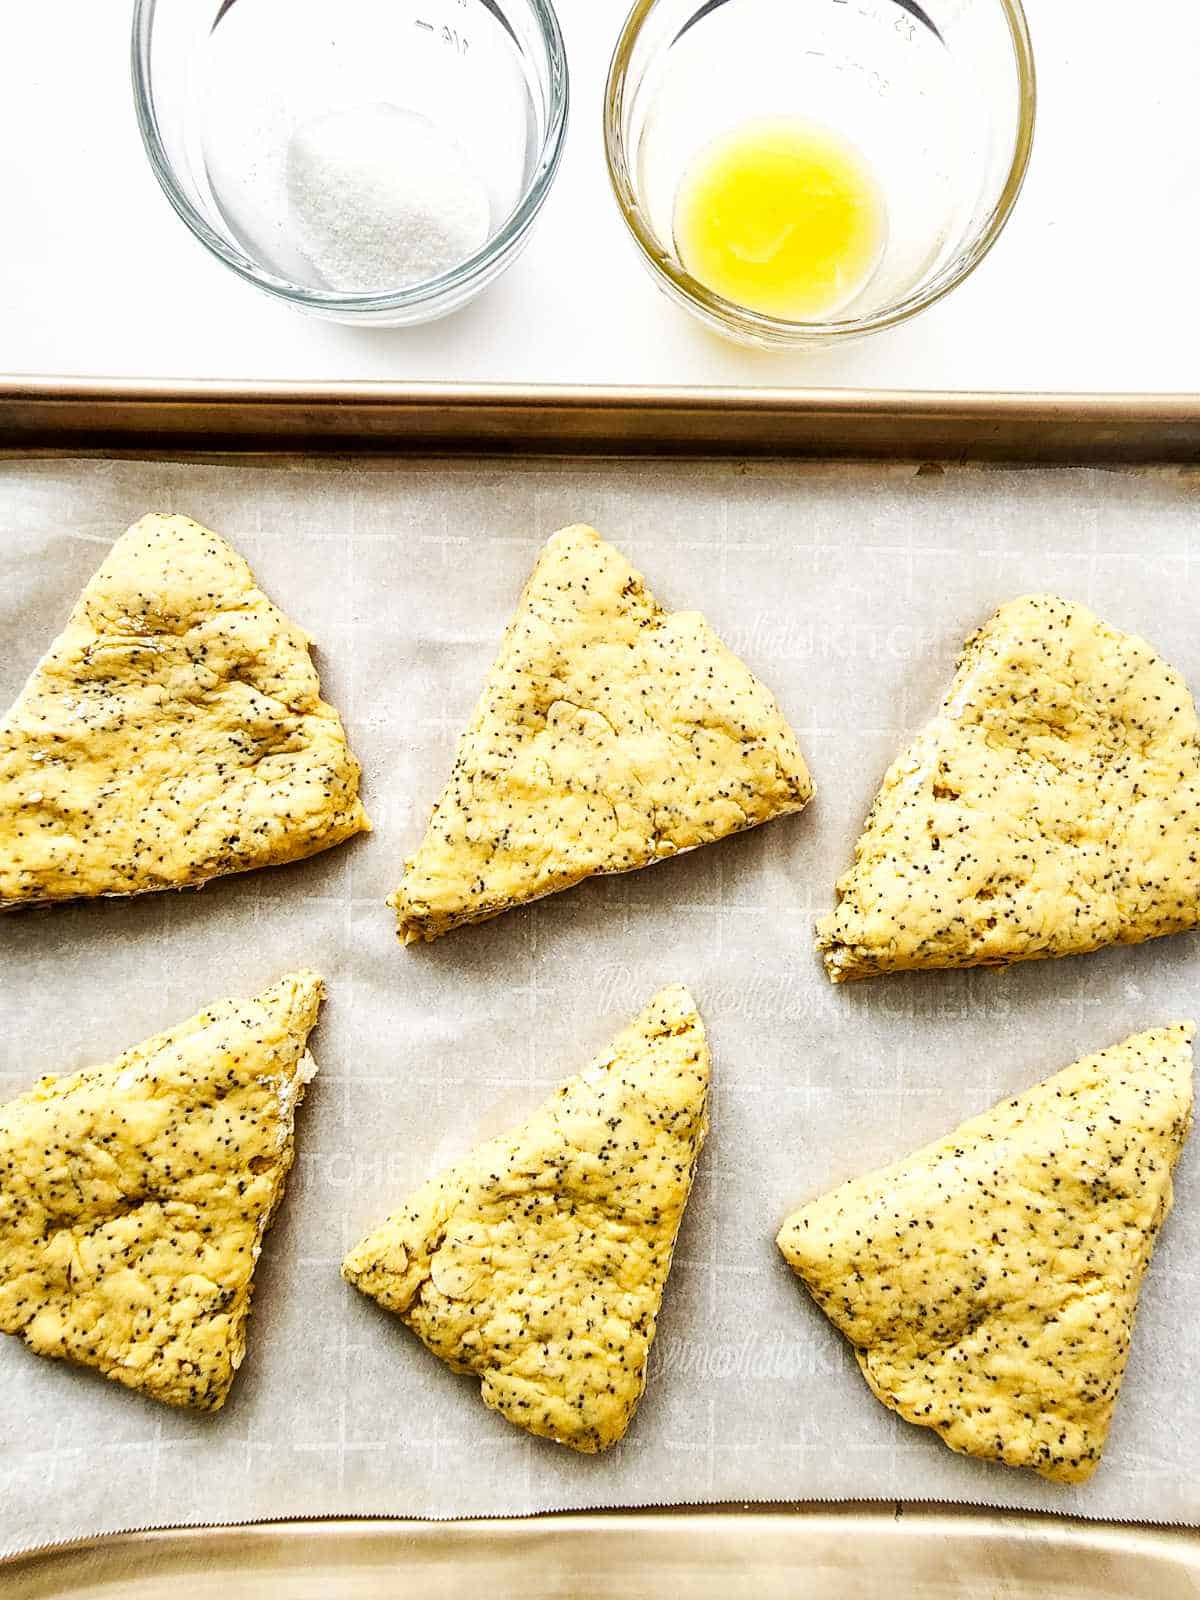 poppy seed scones on a parchment covered baking sheet.